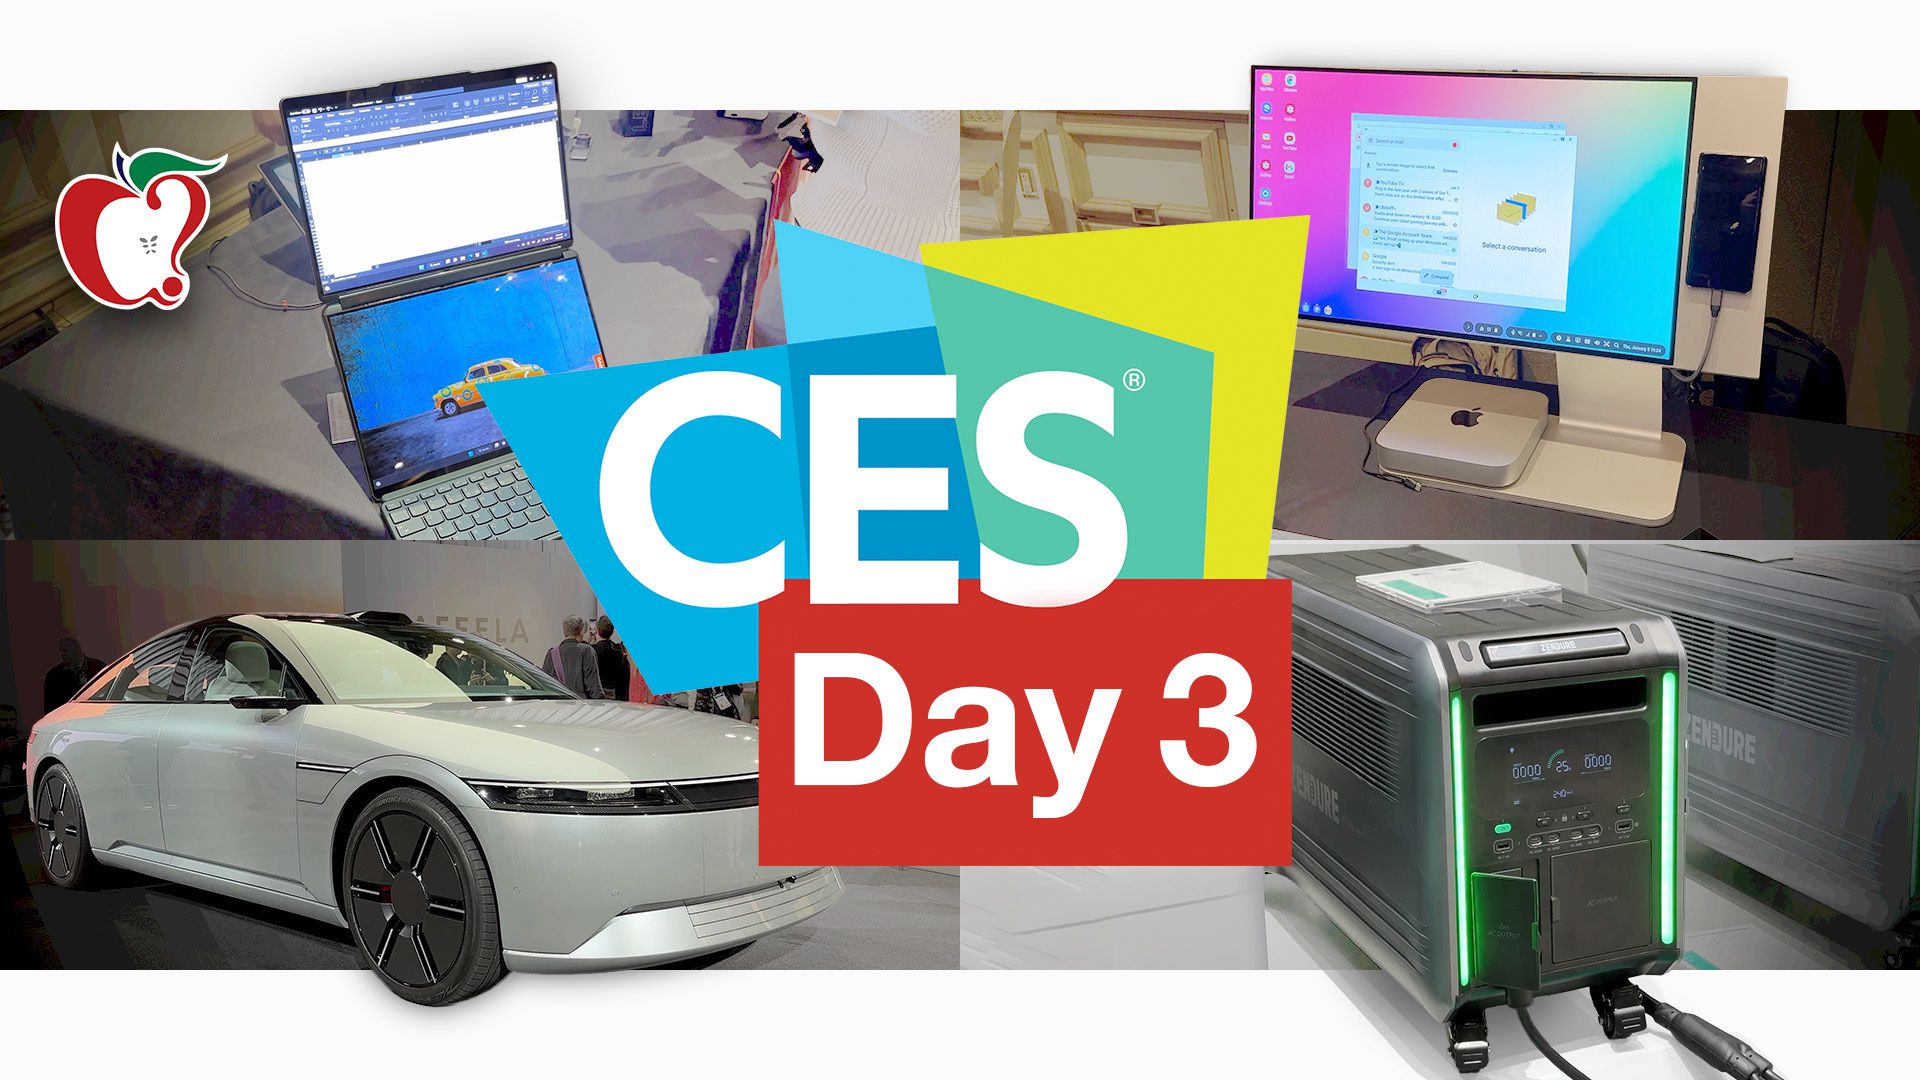 Day 3 CES Video Roundup: Chargers From Hyper and Zendure, Lenovo's iPad Pro-Like..